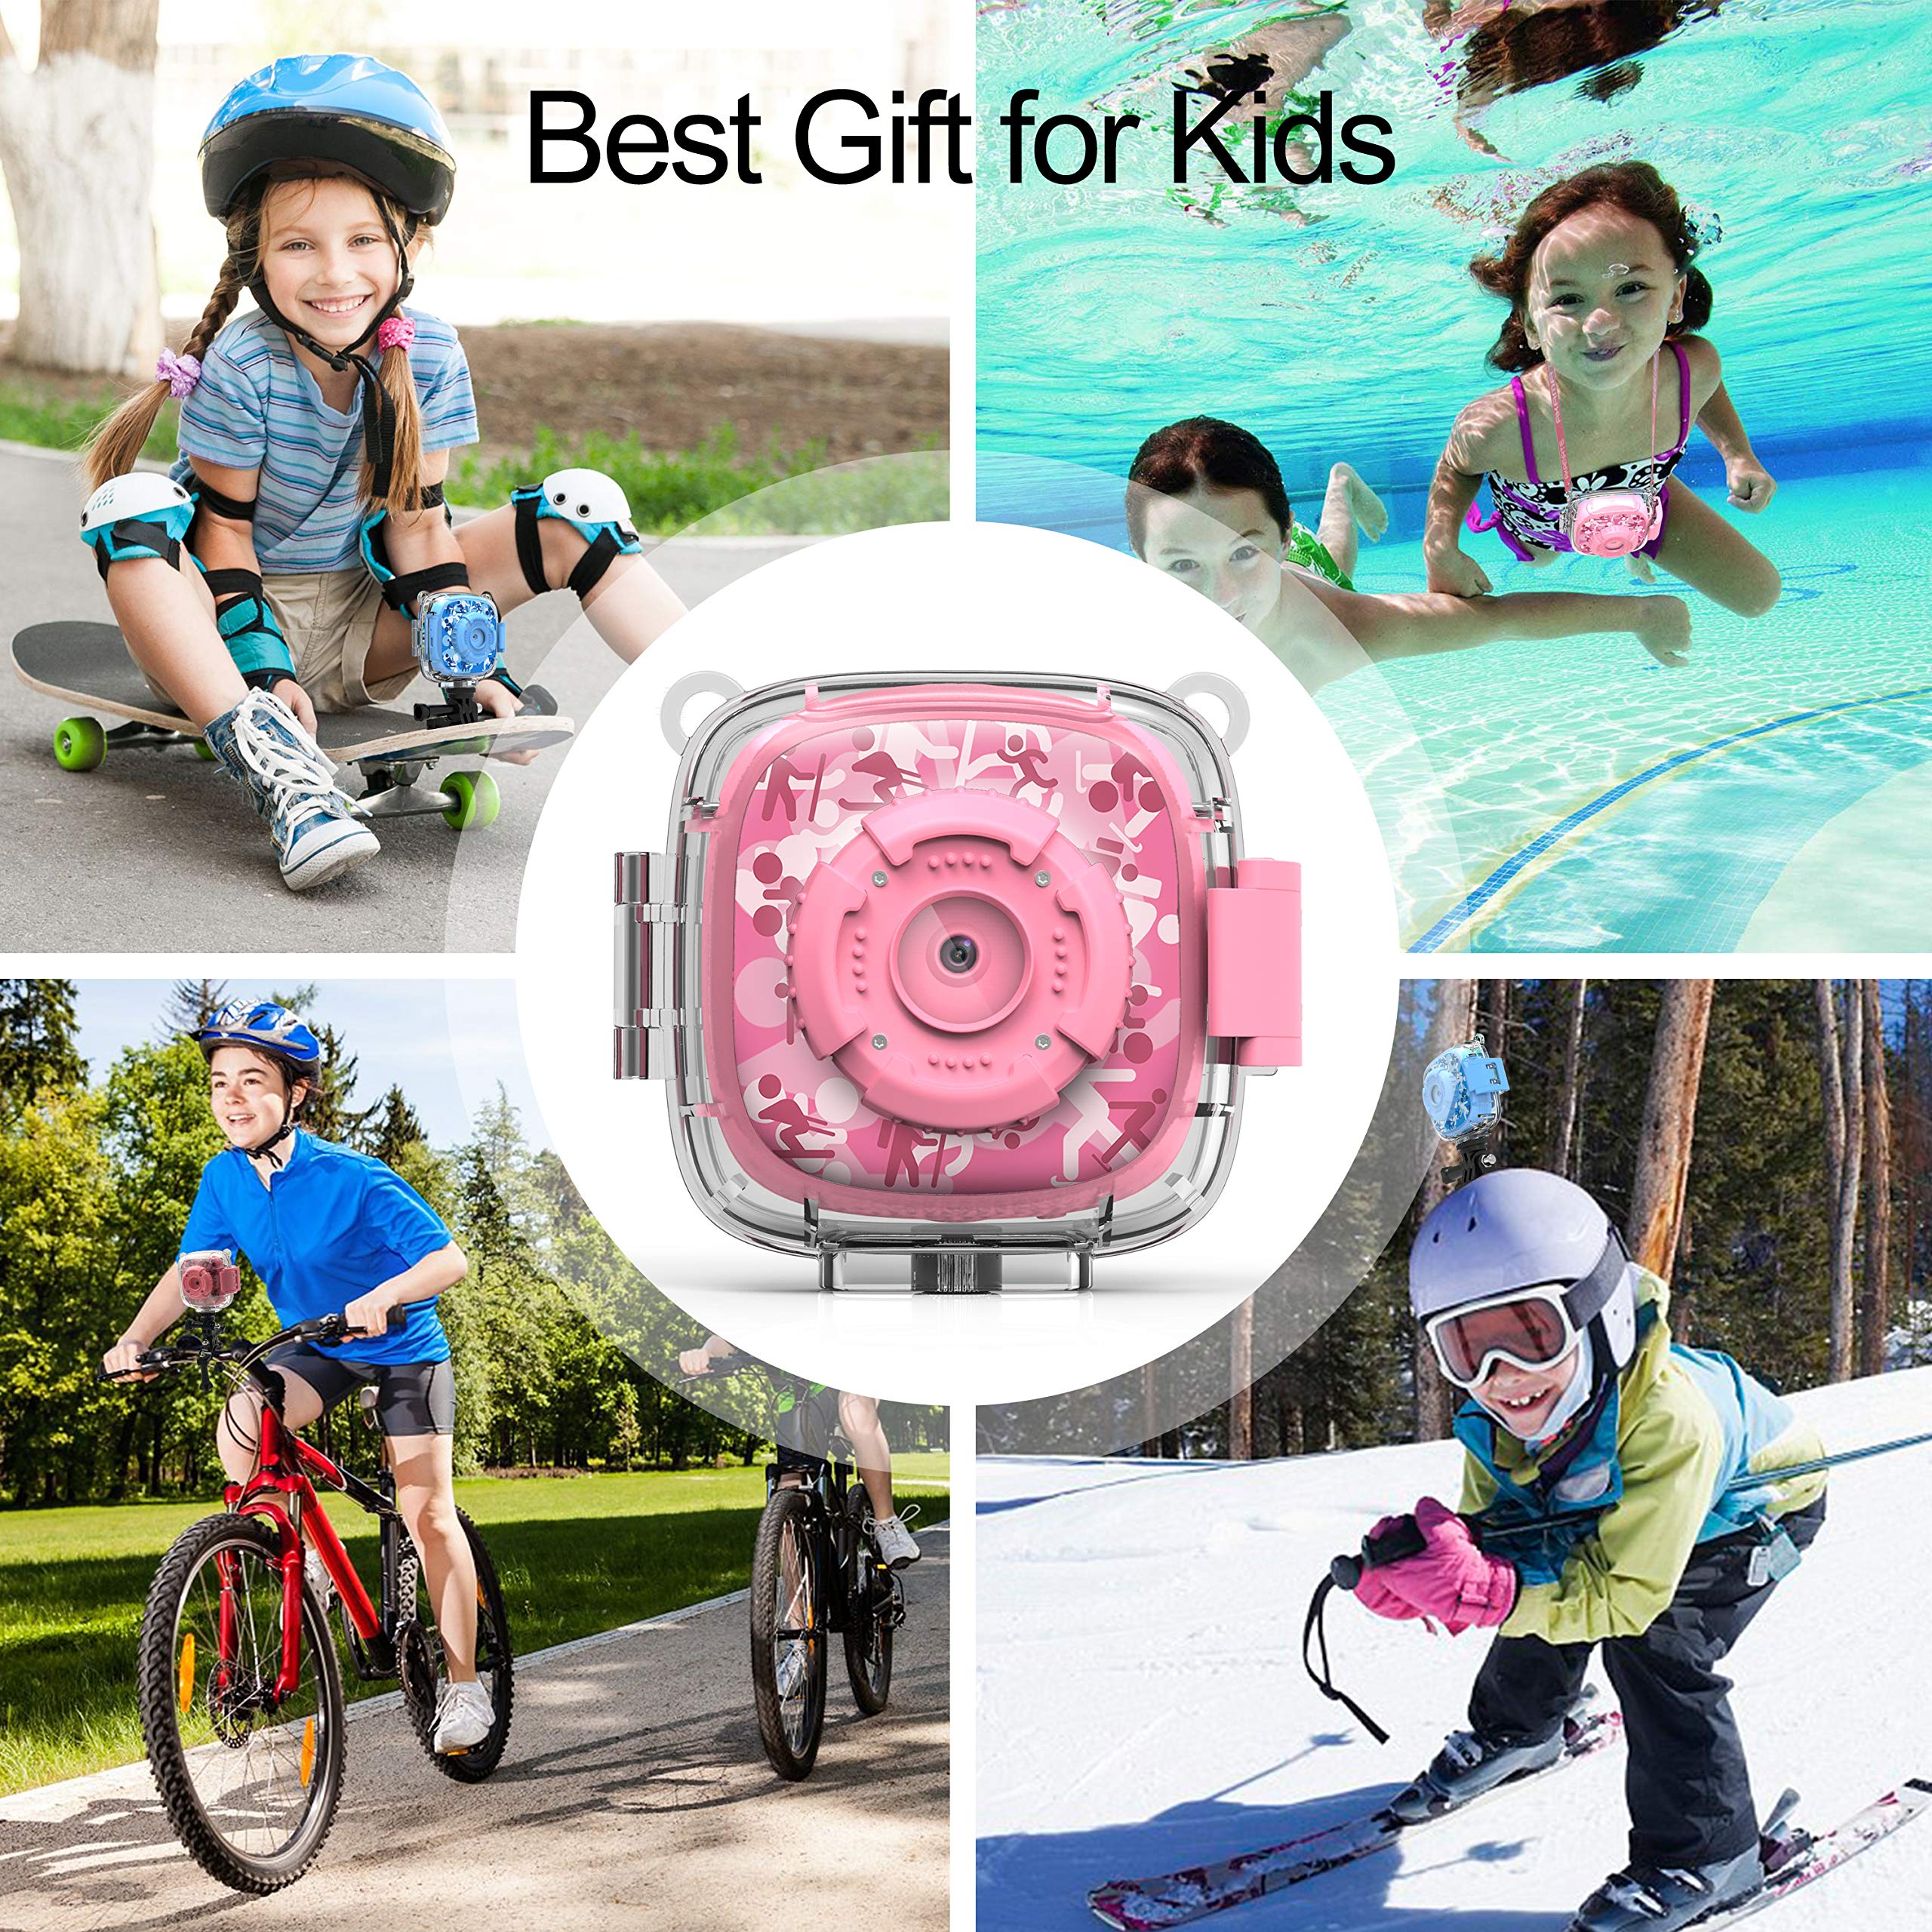 AKAMATE Kids Action Camera Waterproof Video Digital Children Cam 1080P HD Sports Camera Camcorder for Boys Girls, Build-in 4Games, 32GB SD Card (Pink)